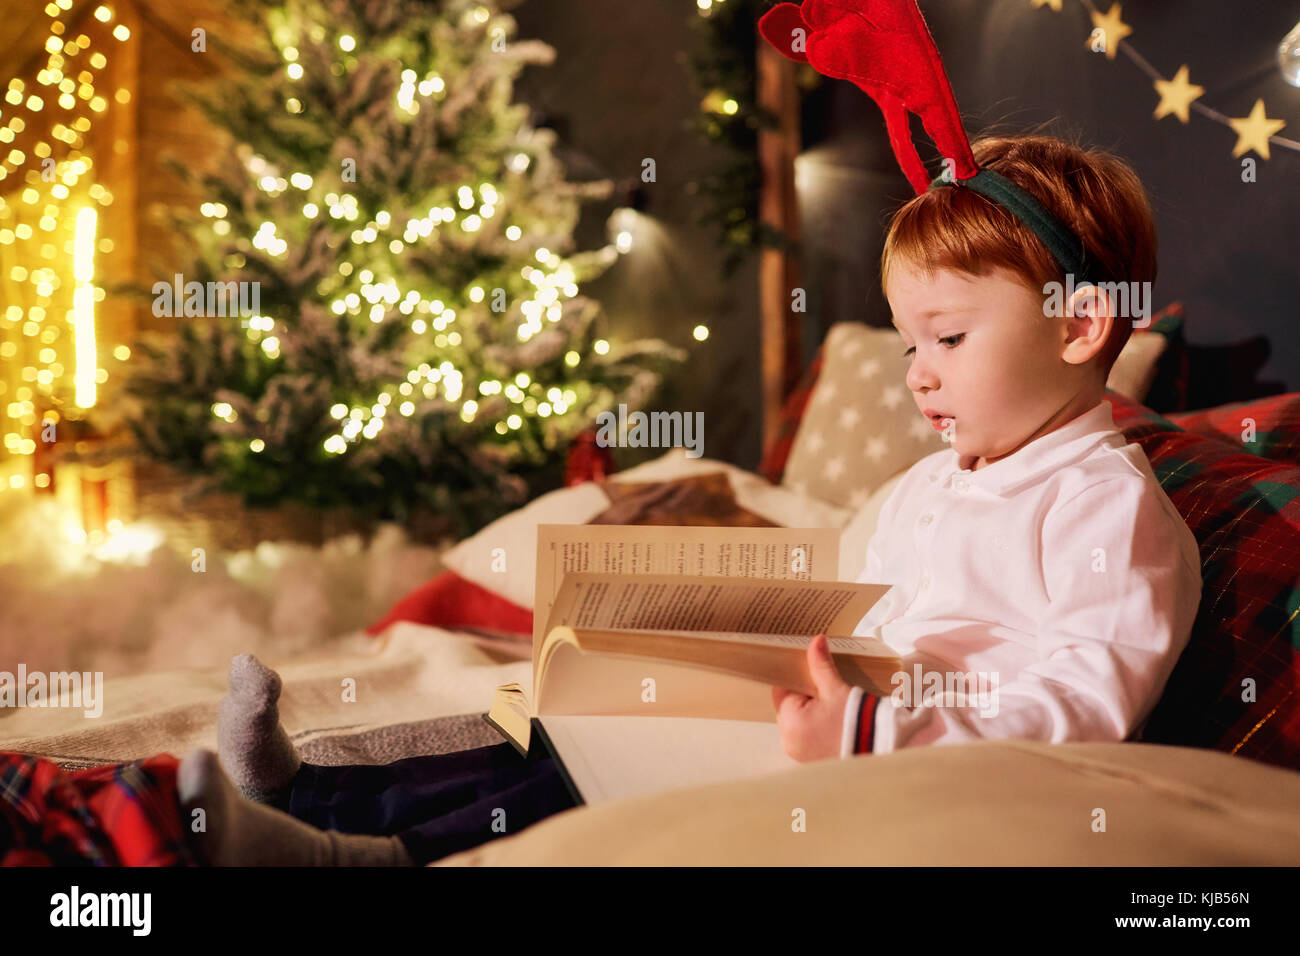 A little boy is reading a book in the Christmas room. Stock Photo